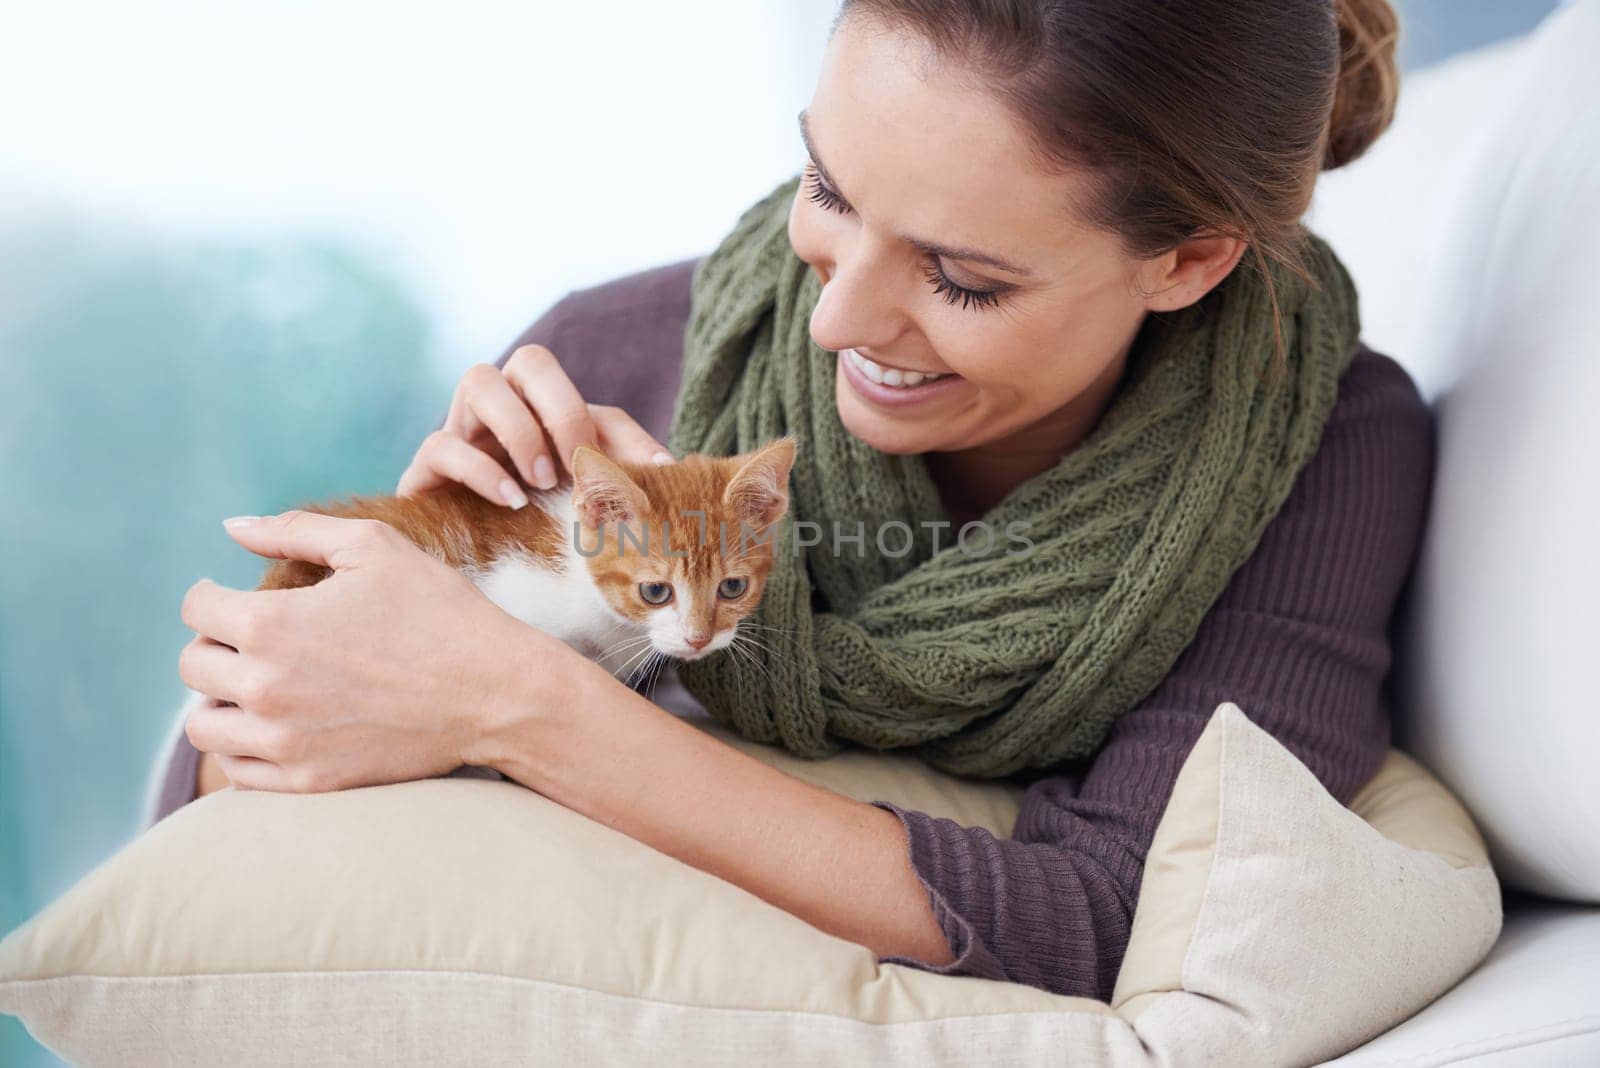 Happy, sofa and woman with kitten in home for bonding, friendship and relax together in house. Animal care, pets and person with adorable, cute and young cat on couch for playing, affection and love.